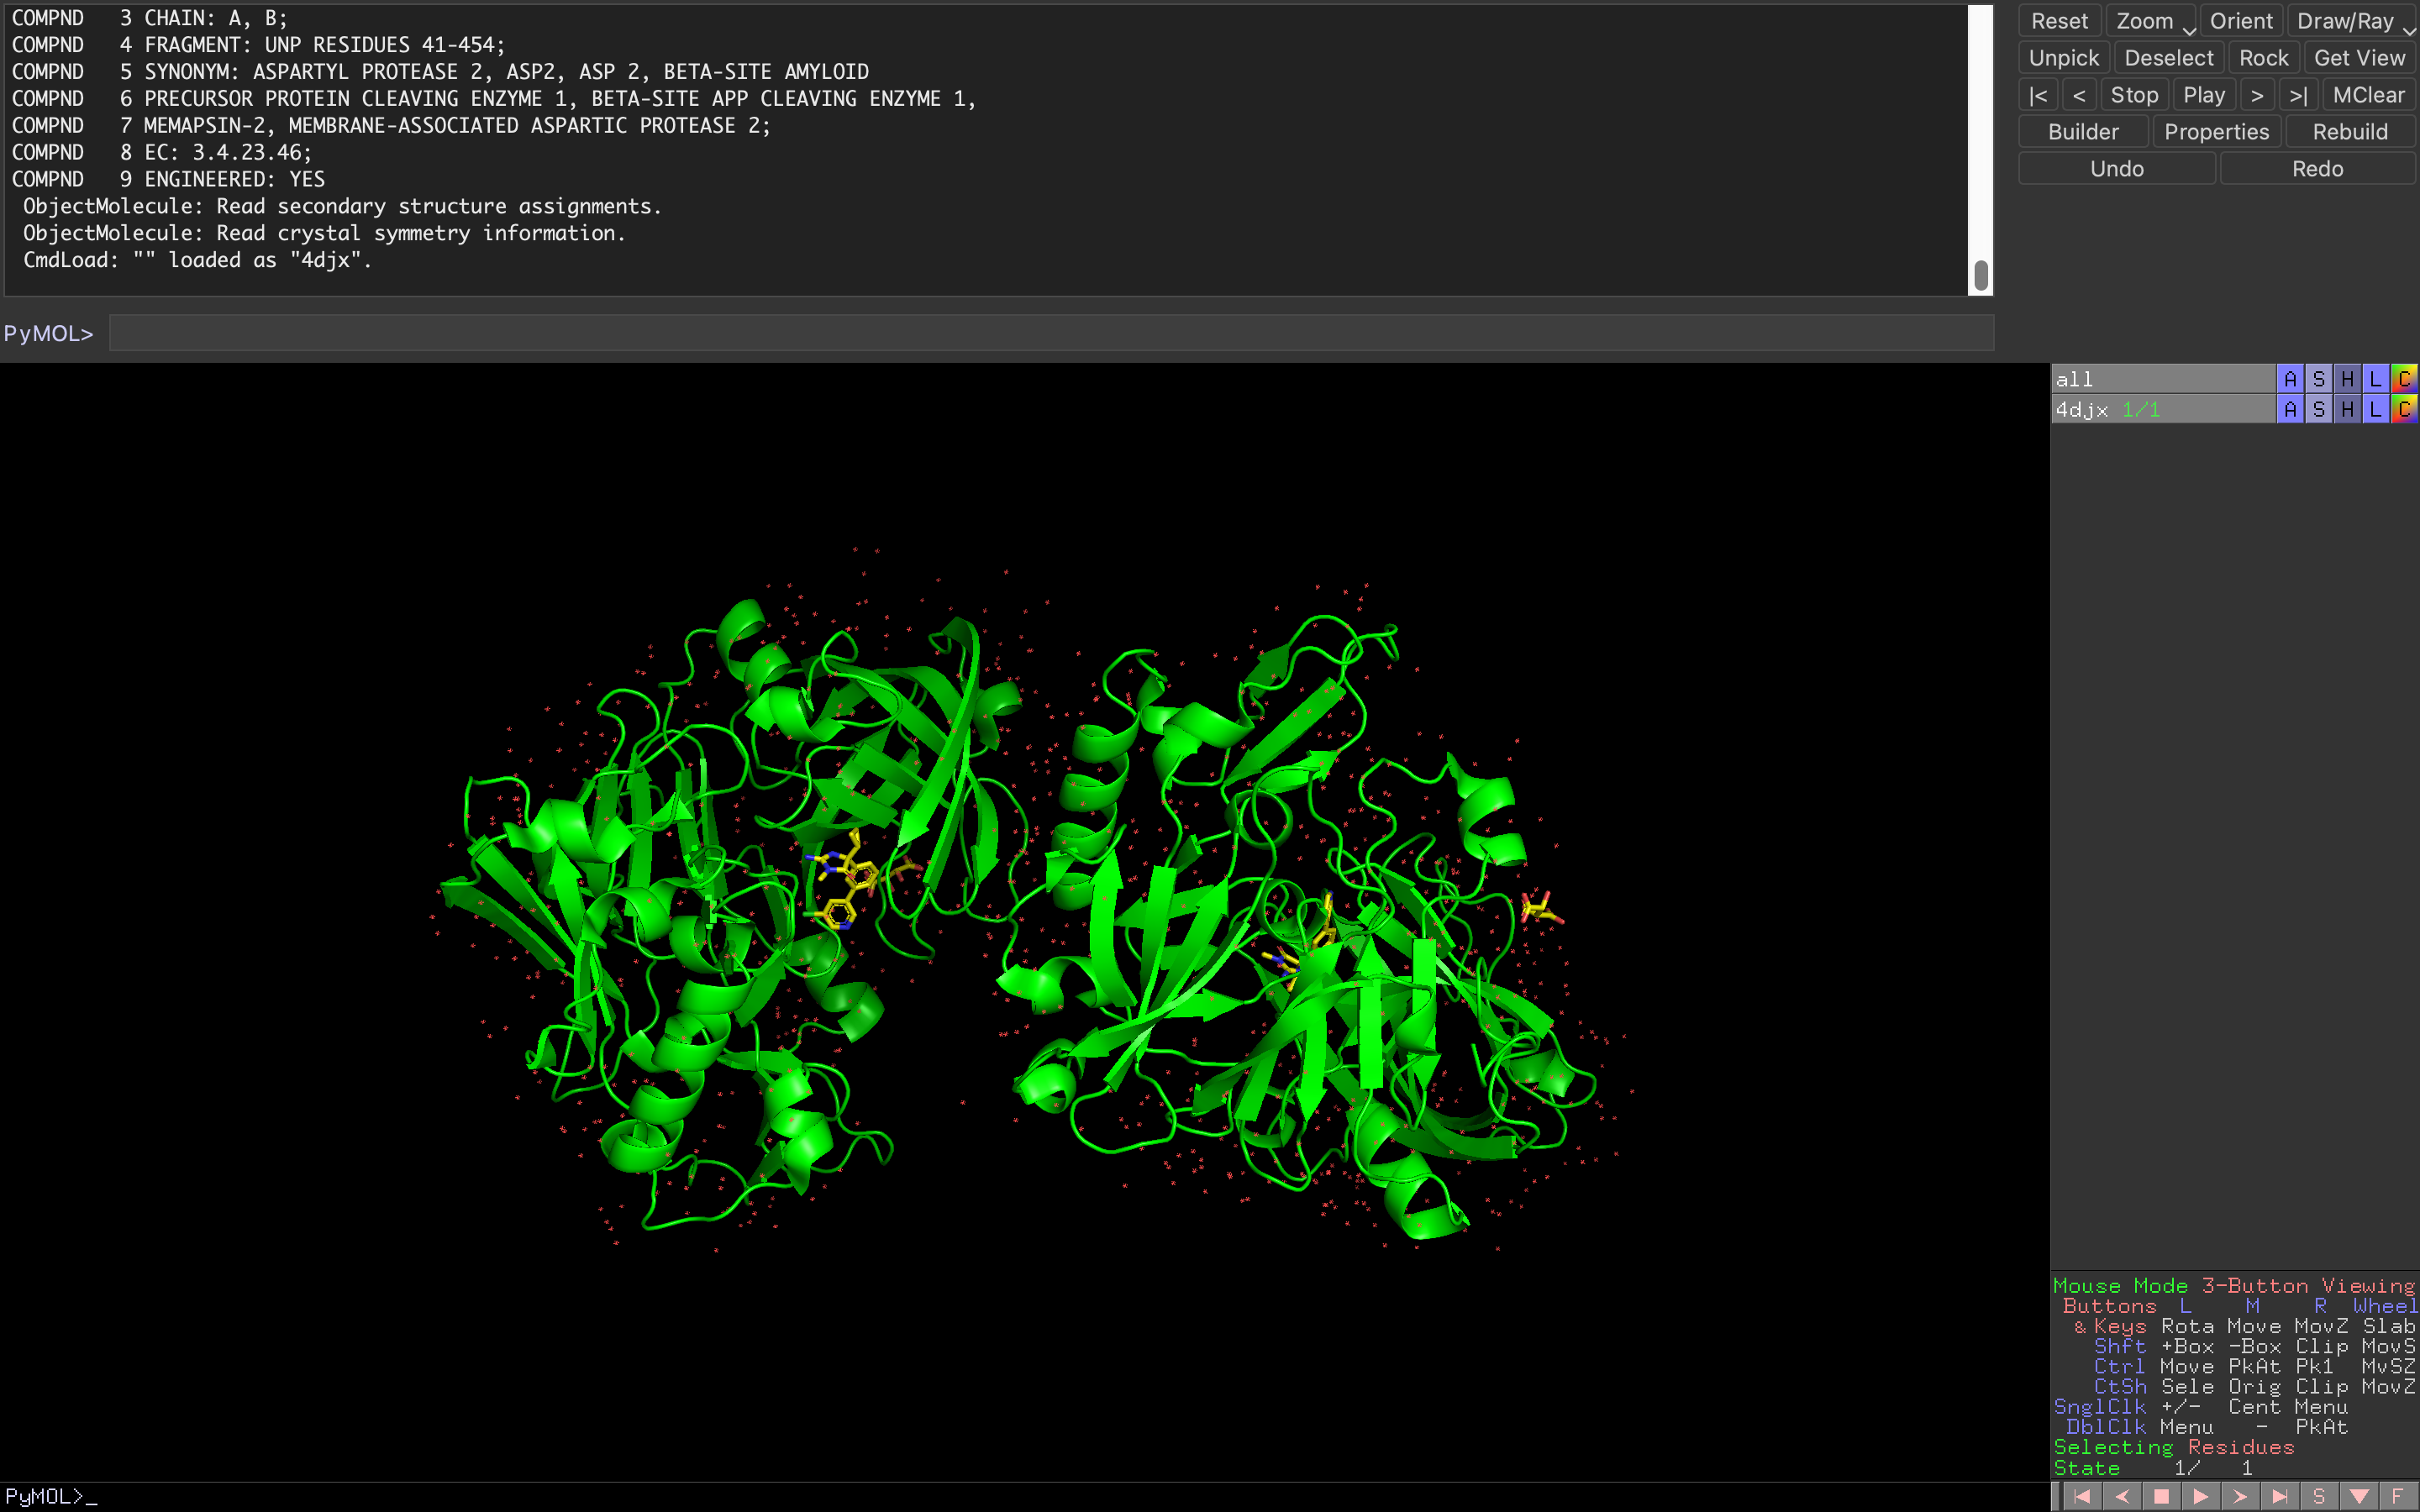 The interface of the molecular visualization software PyMOL once you load a molecule